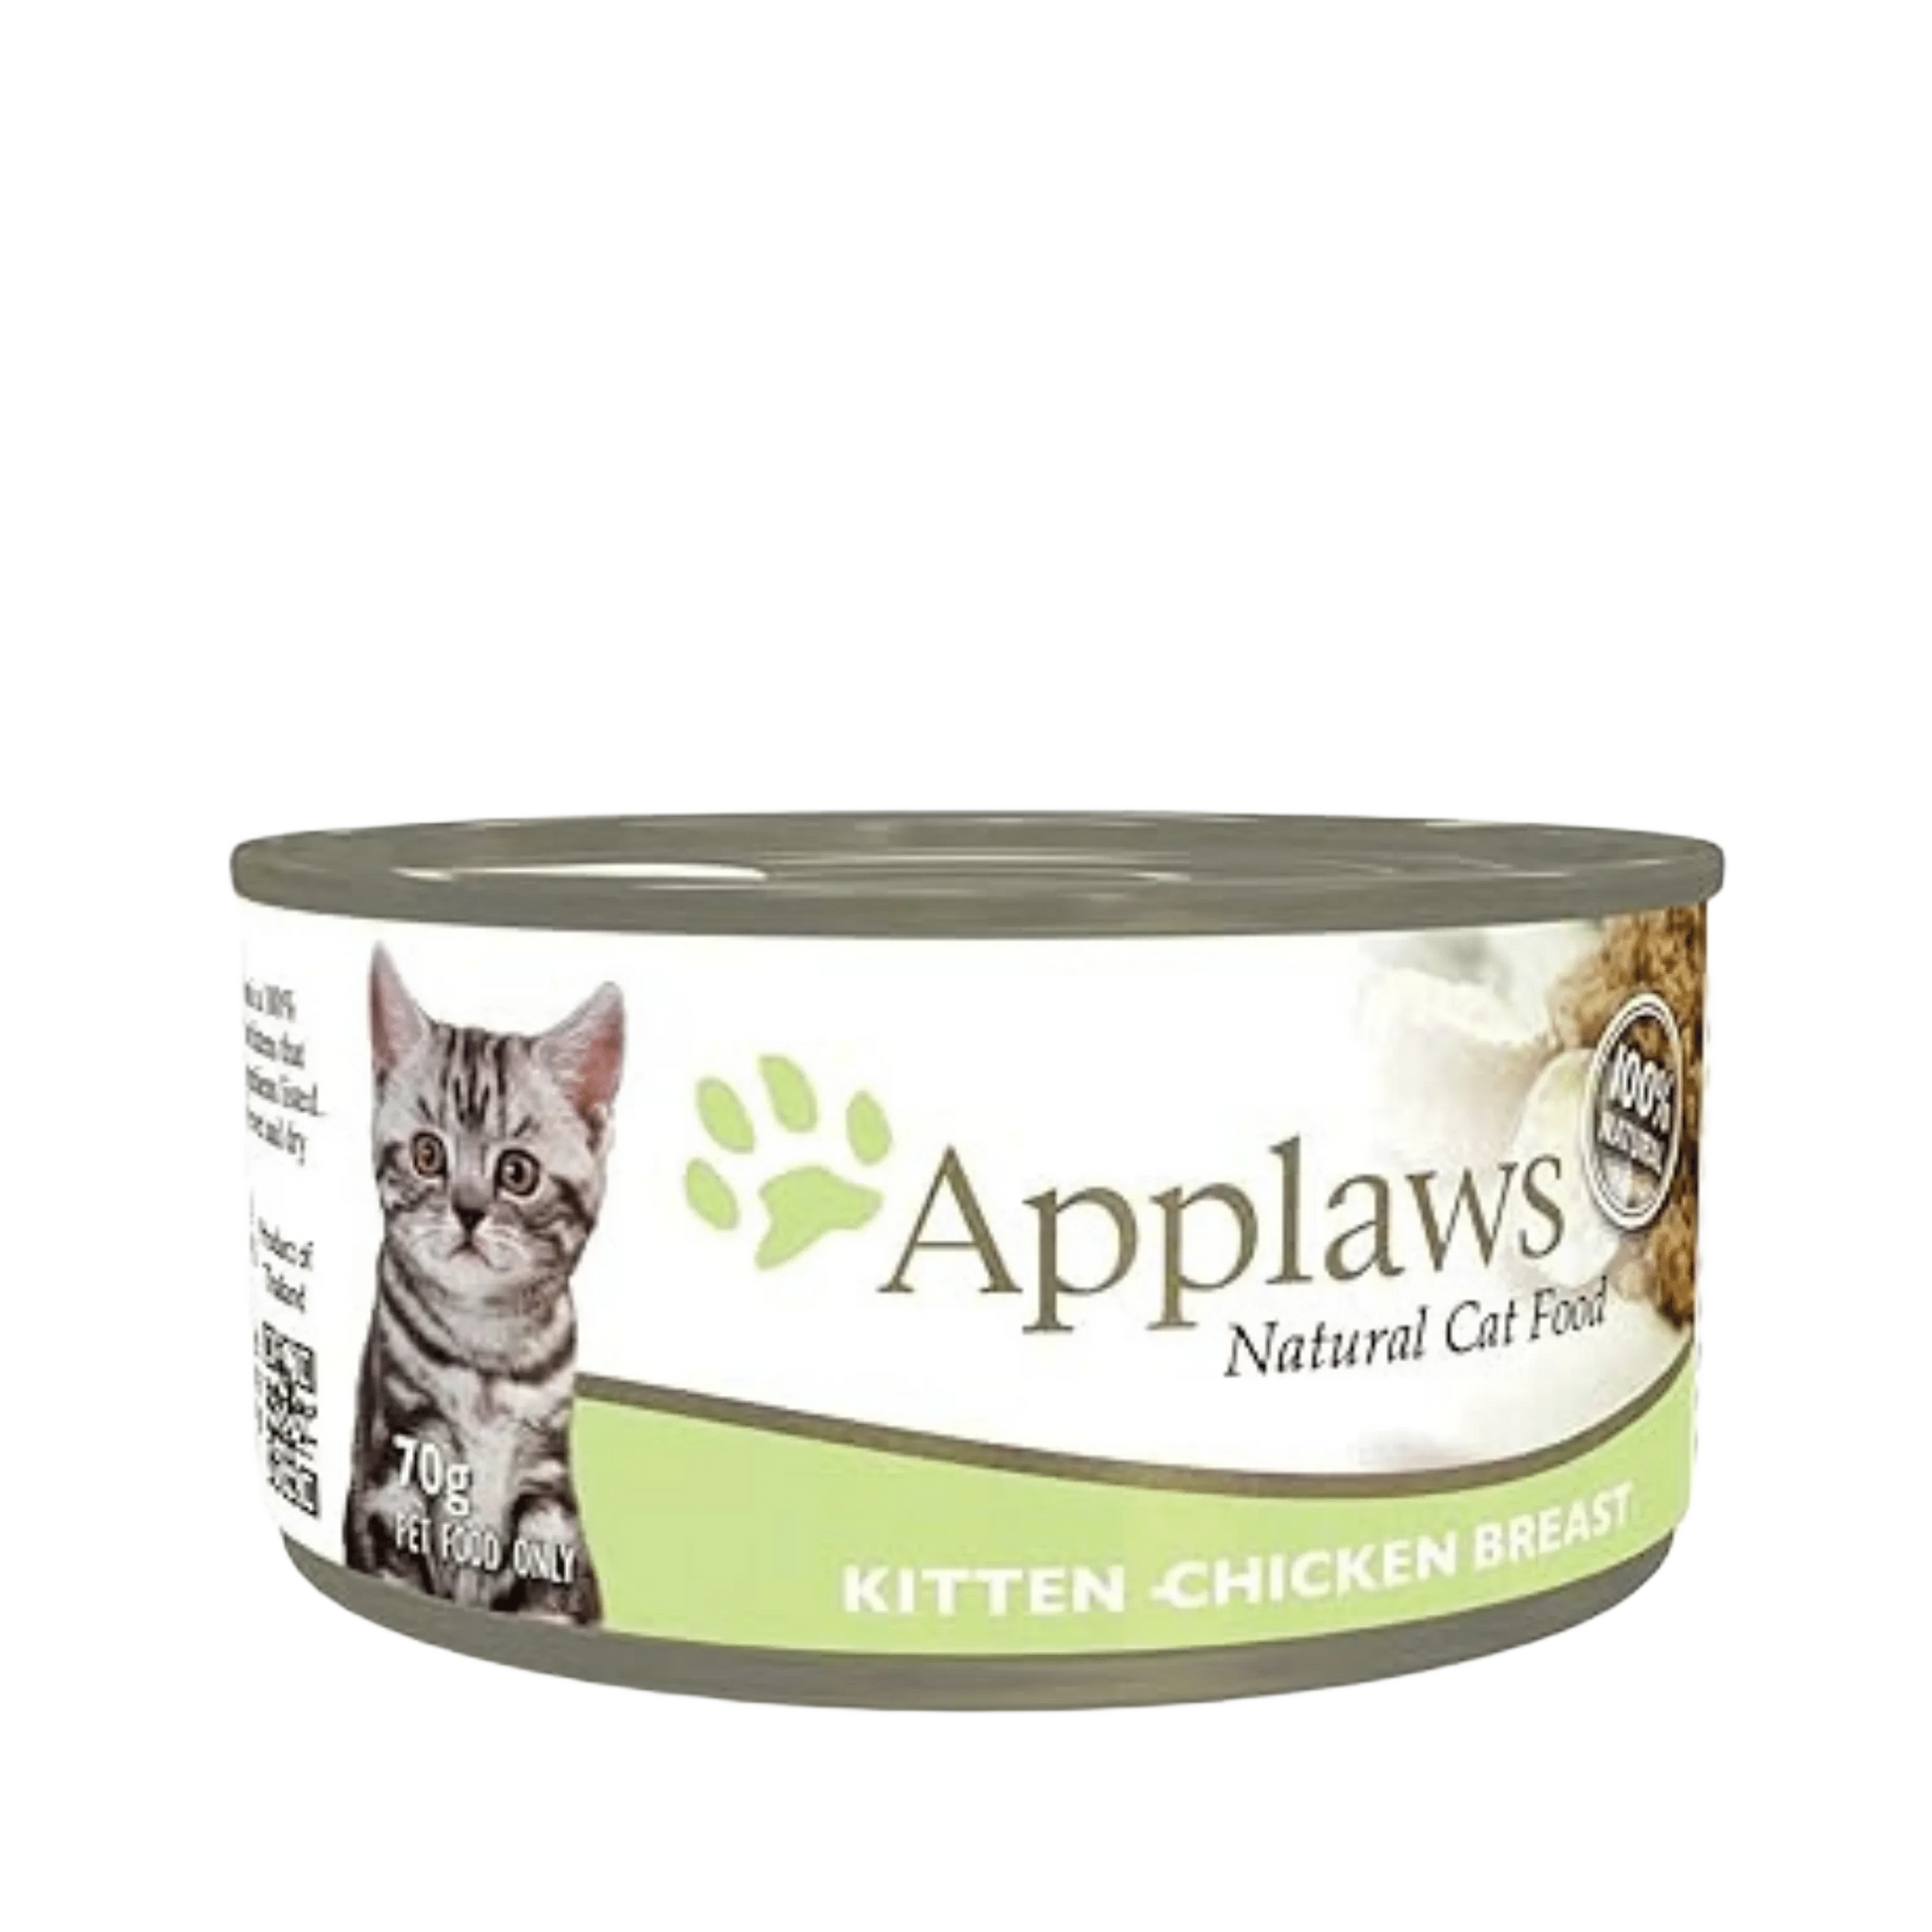 APPLAWS KITTEN CHICK BREAST CAN